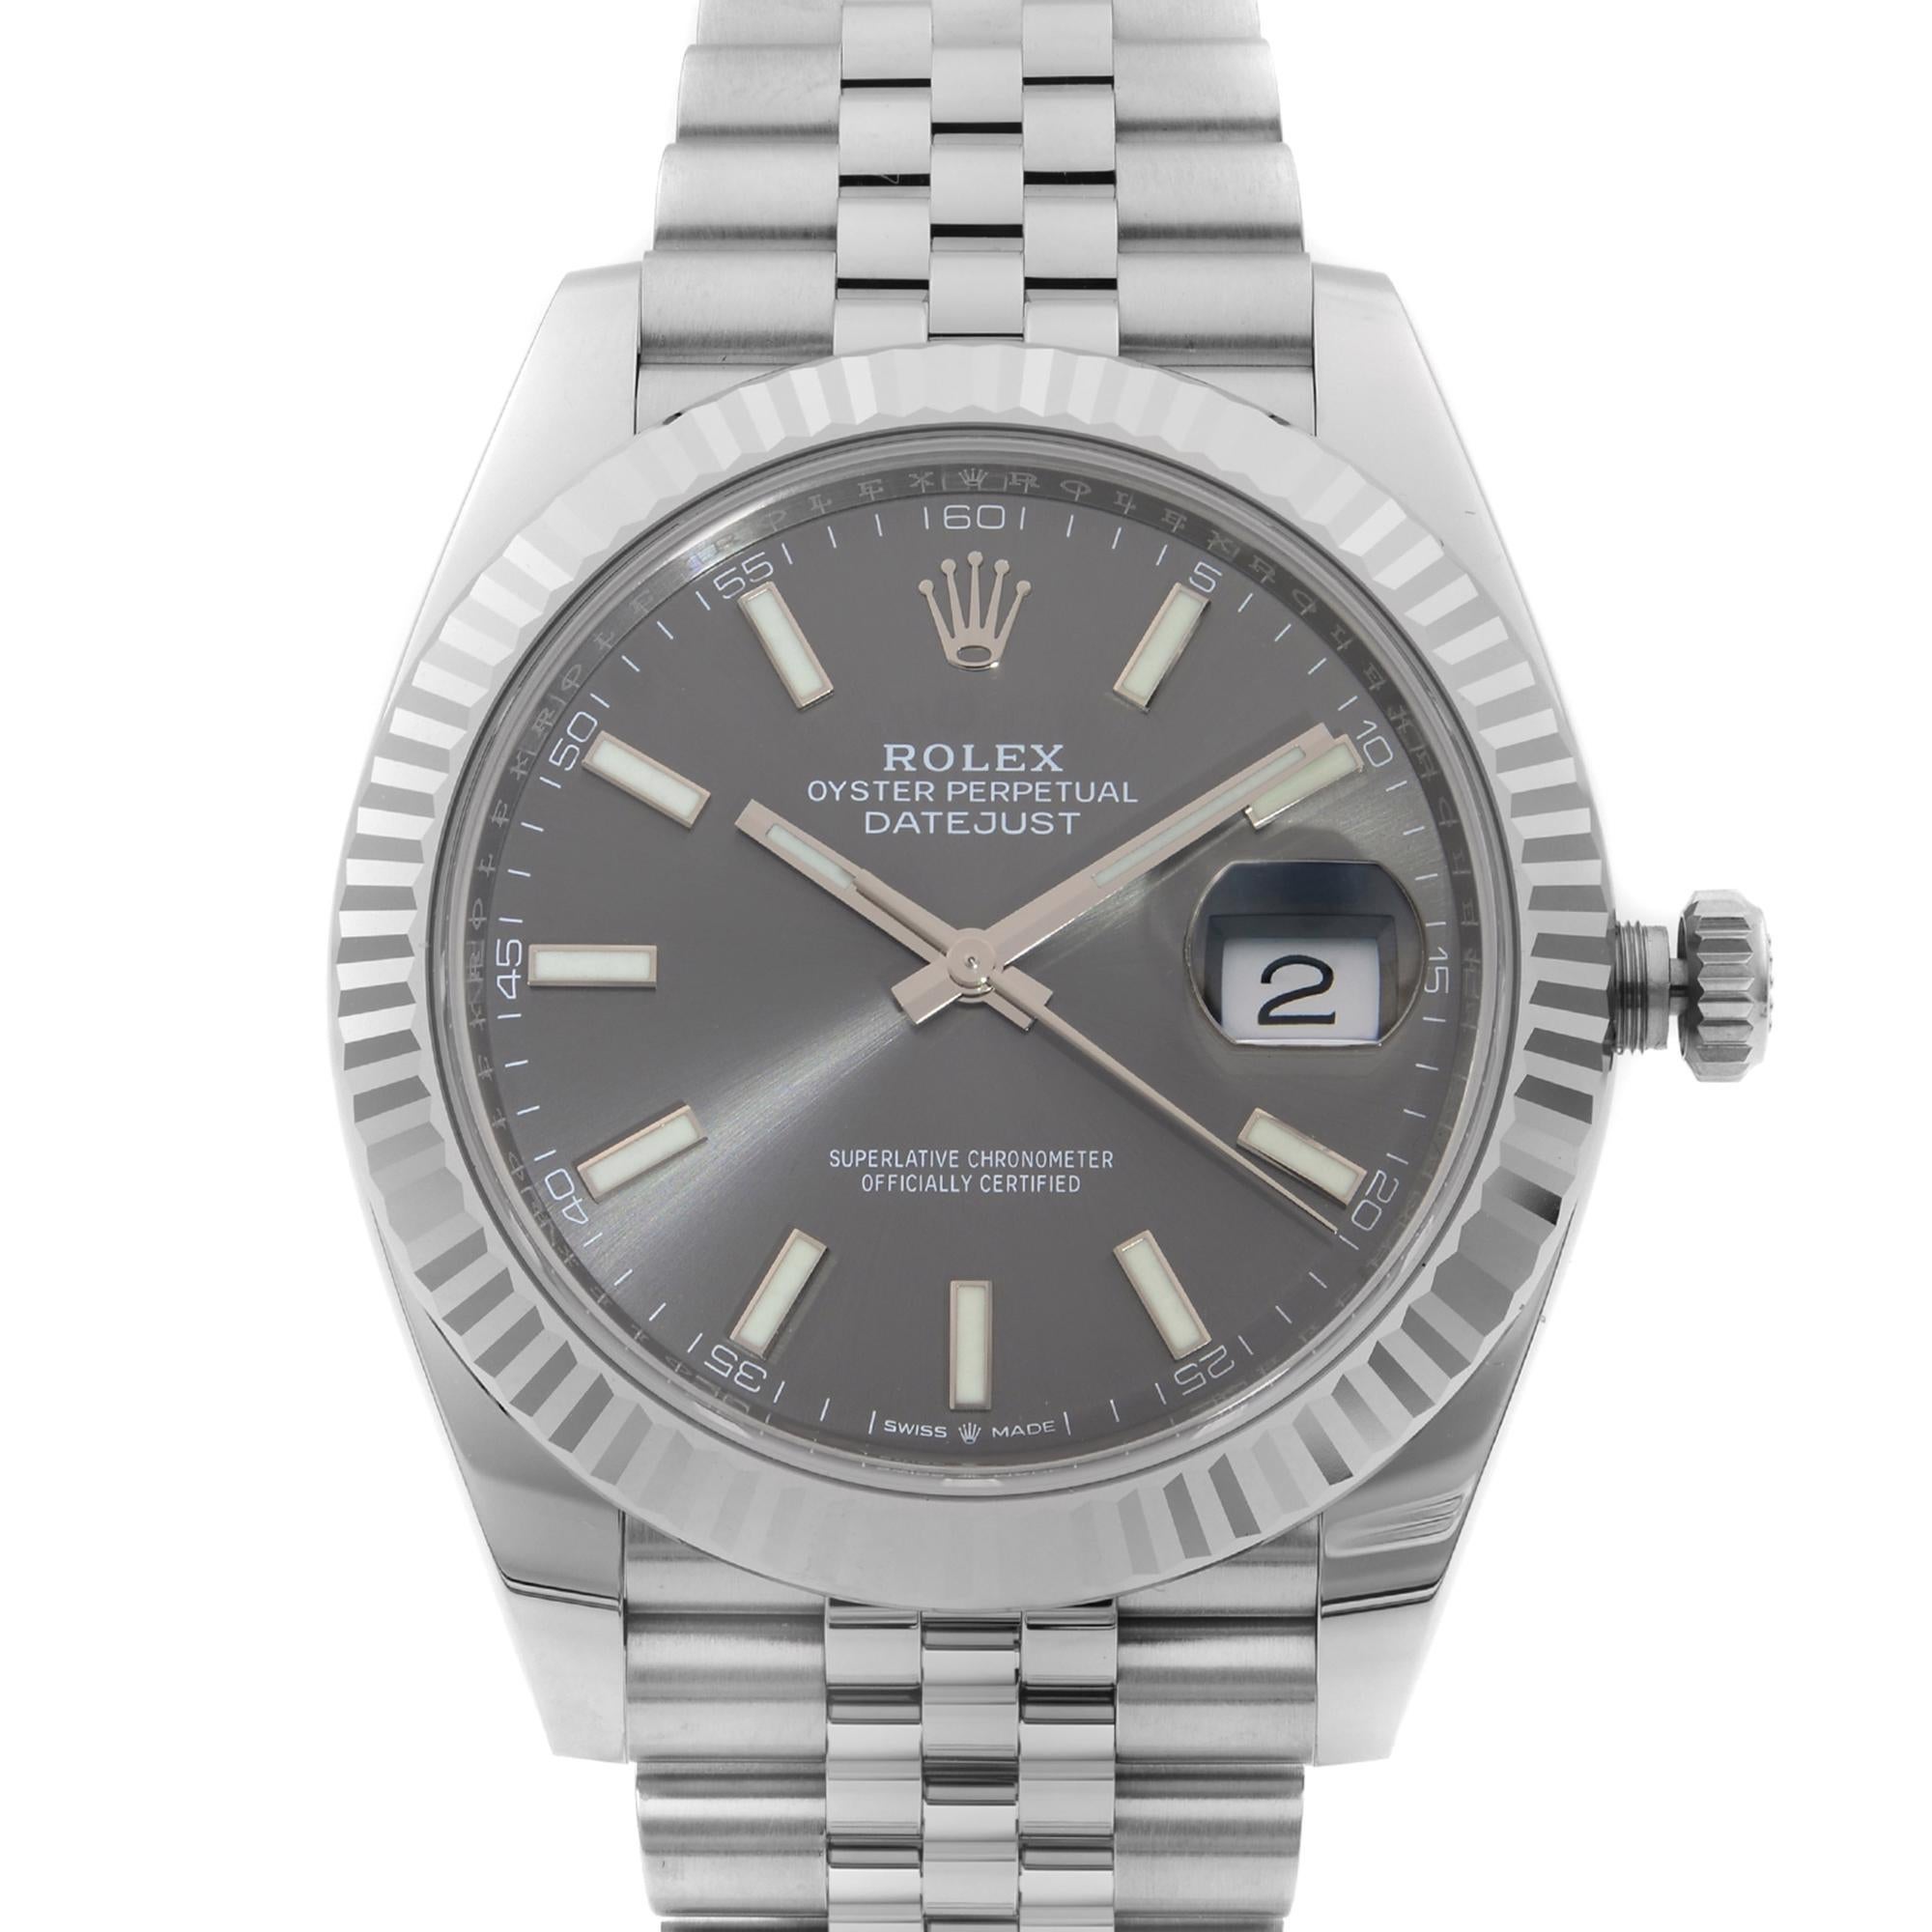 Unworn Rolex Datejust 41 Steel Gold Bezel Jubilee Band Rhodium Dial Men Watch 126334, This Beautiful Timepiece Come with a 2022 Card and is Powered by Mechanical (Automatic) Movement And Features: Round Stainless Steel Case with a Stainless Steel